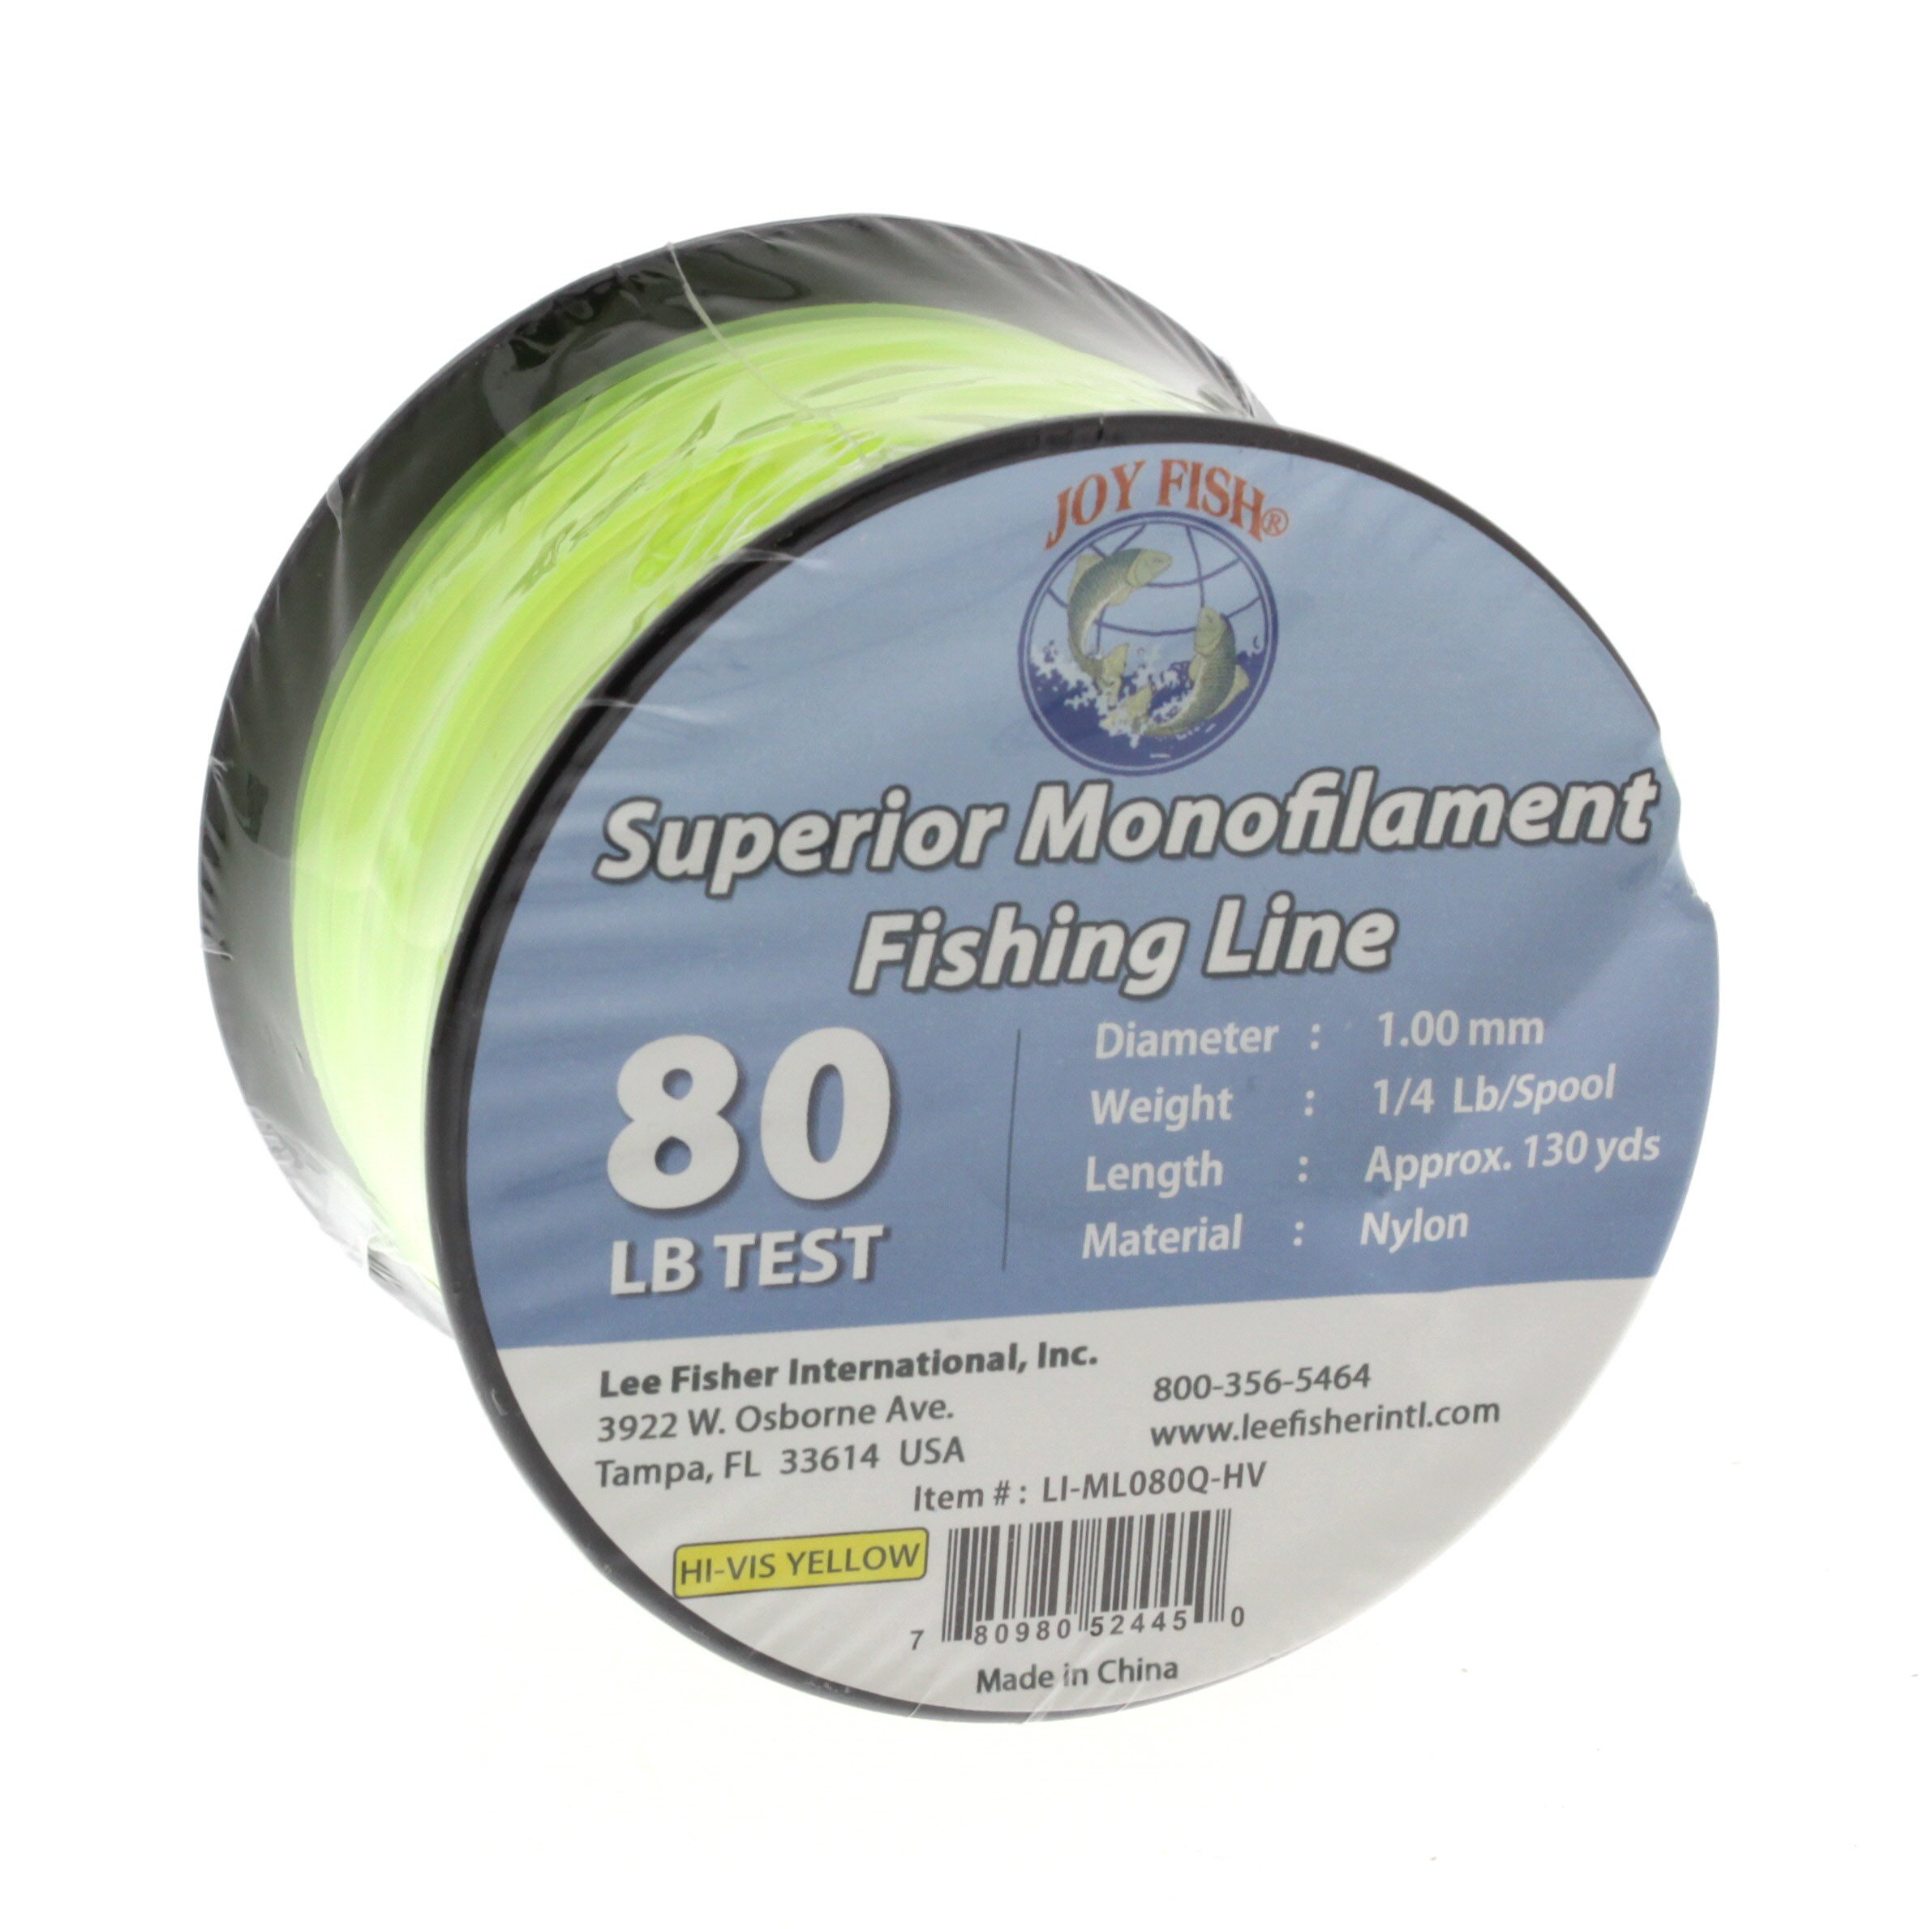 Lee Fisher Superior Monofilament Yellow Fishing Line 80 Lb